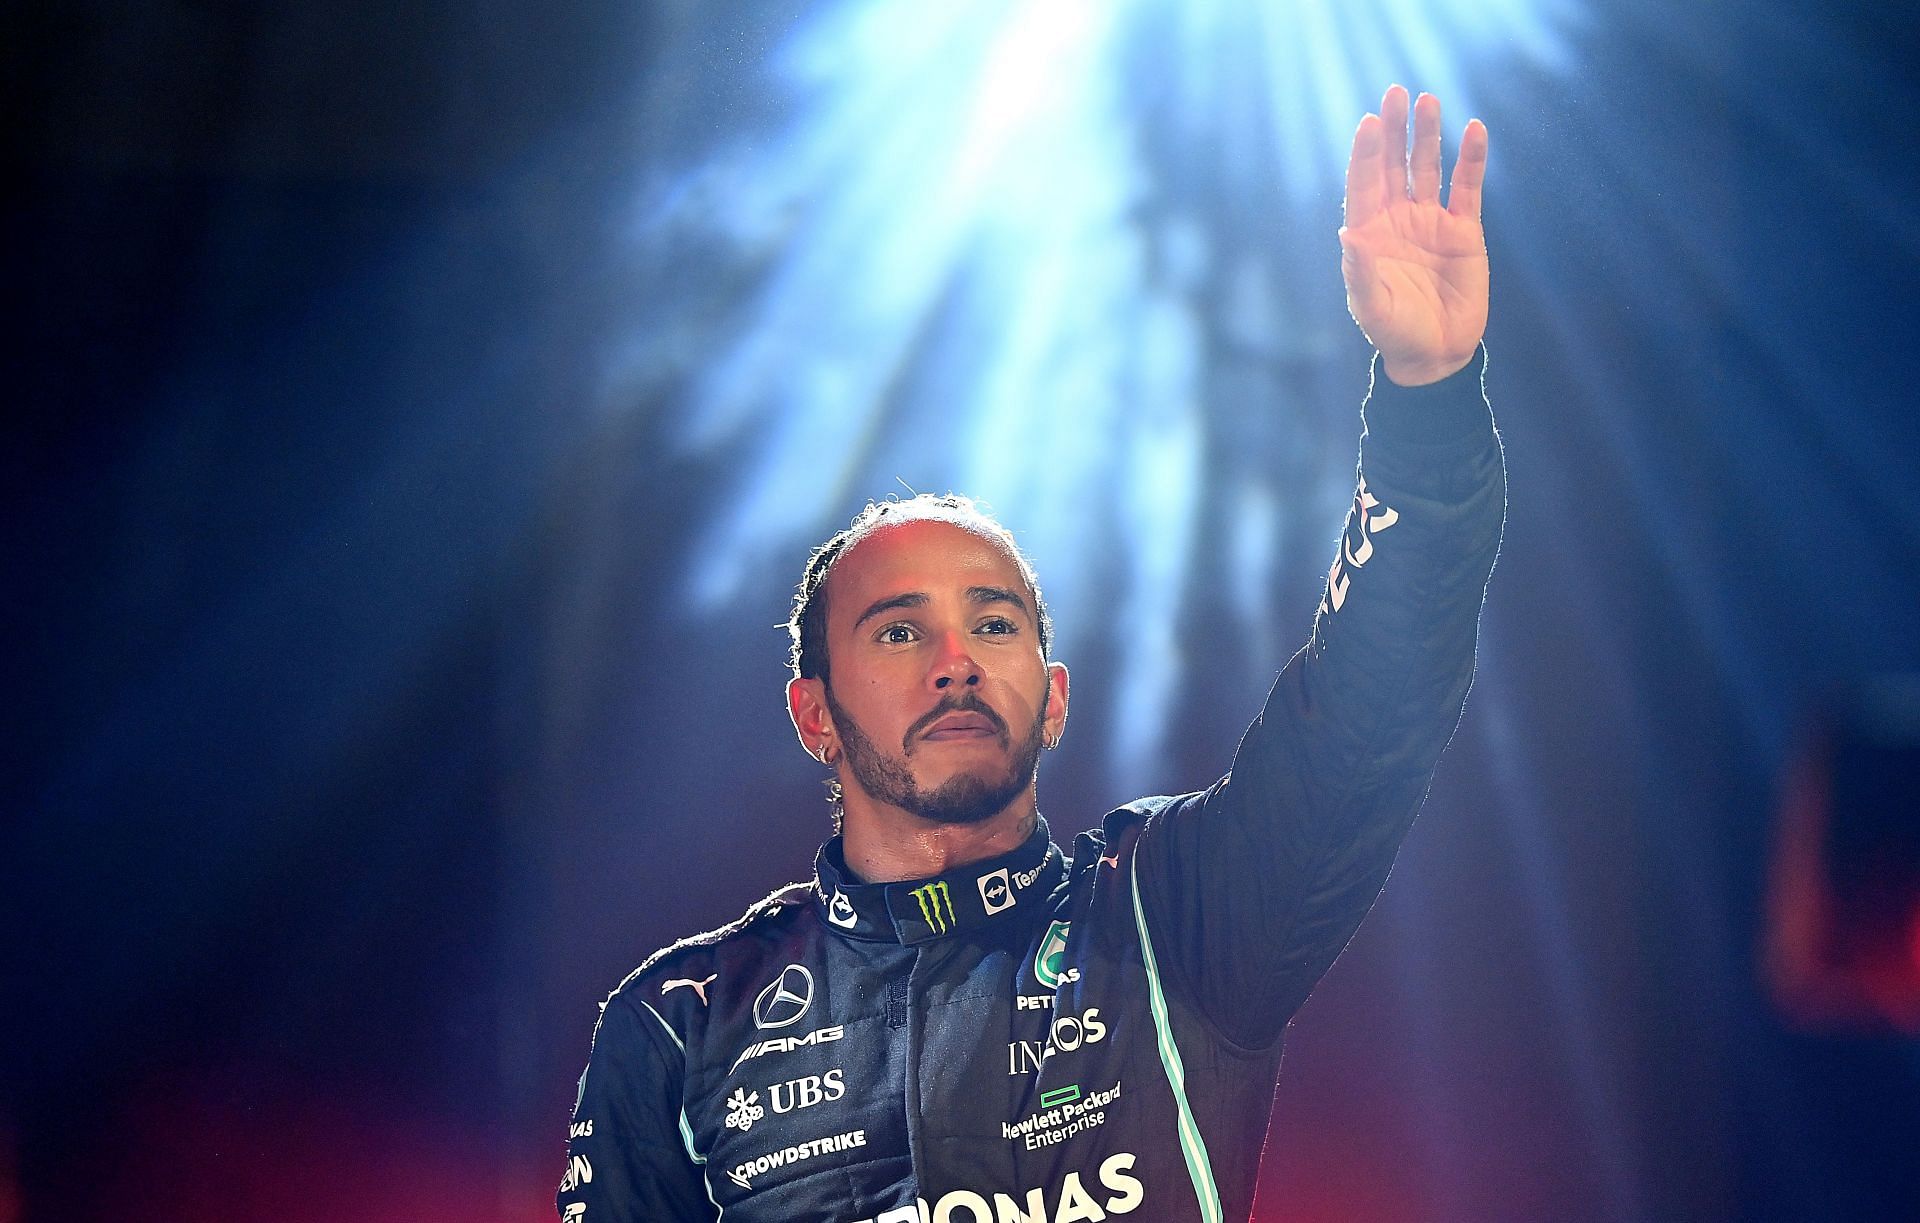 Lewis Hamilton has been partnered with some of the best talents in F1